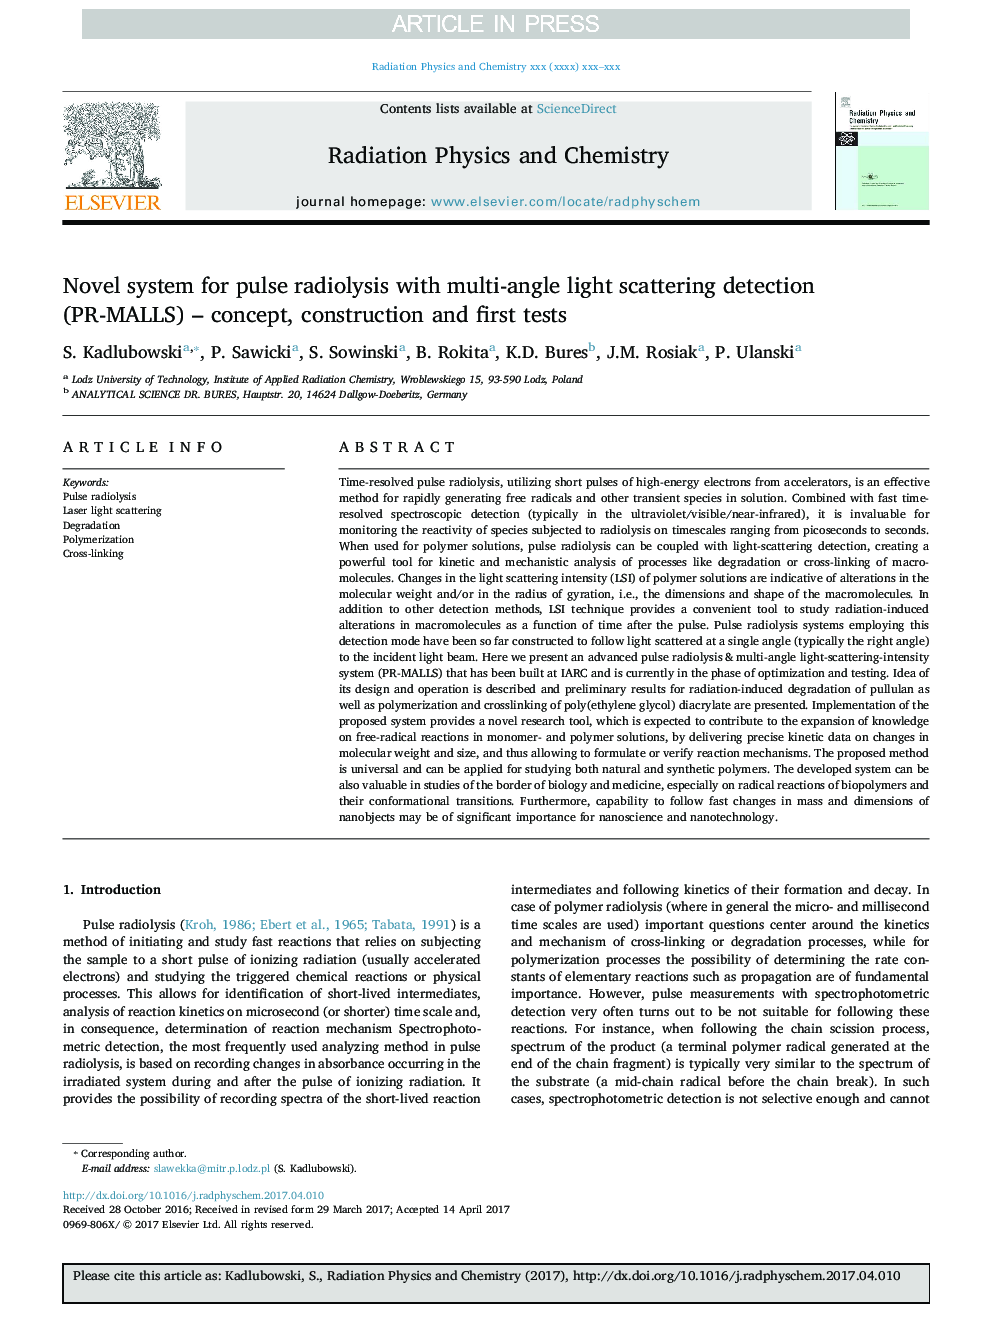 Novel system for pulse radiolysis with multi-angle light scattering detection (PR-MALLS) - concept, construction and first tests